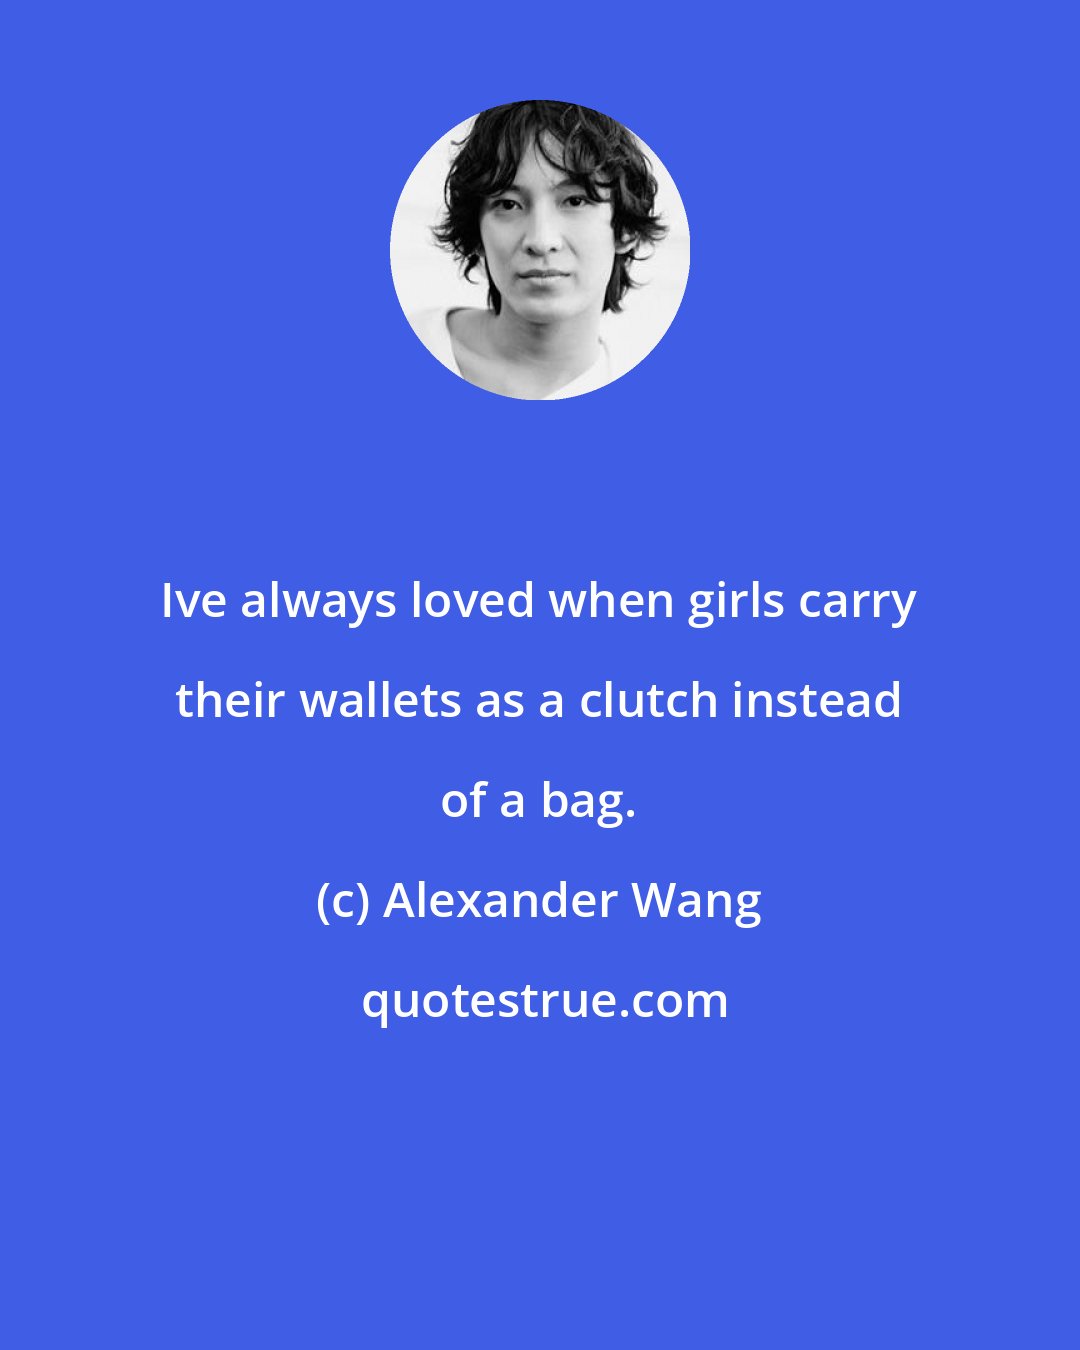 Alexander Wang: Ive always loved when girls carry their wallets as a clutch instead of a bag.